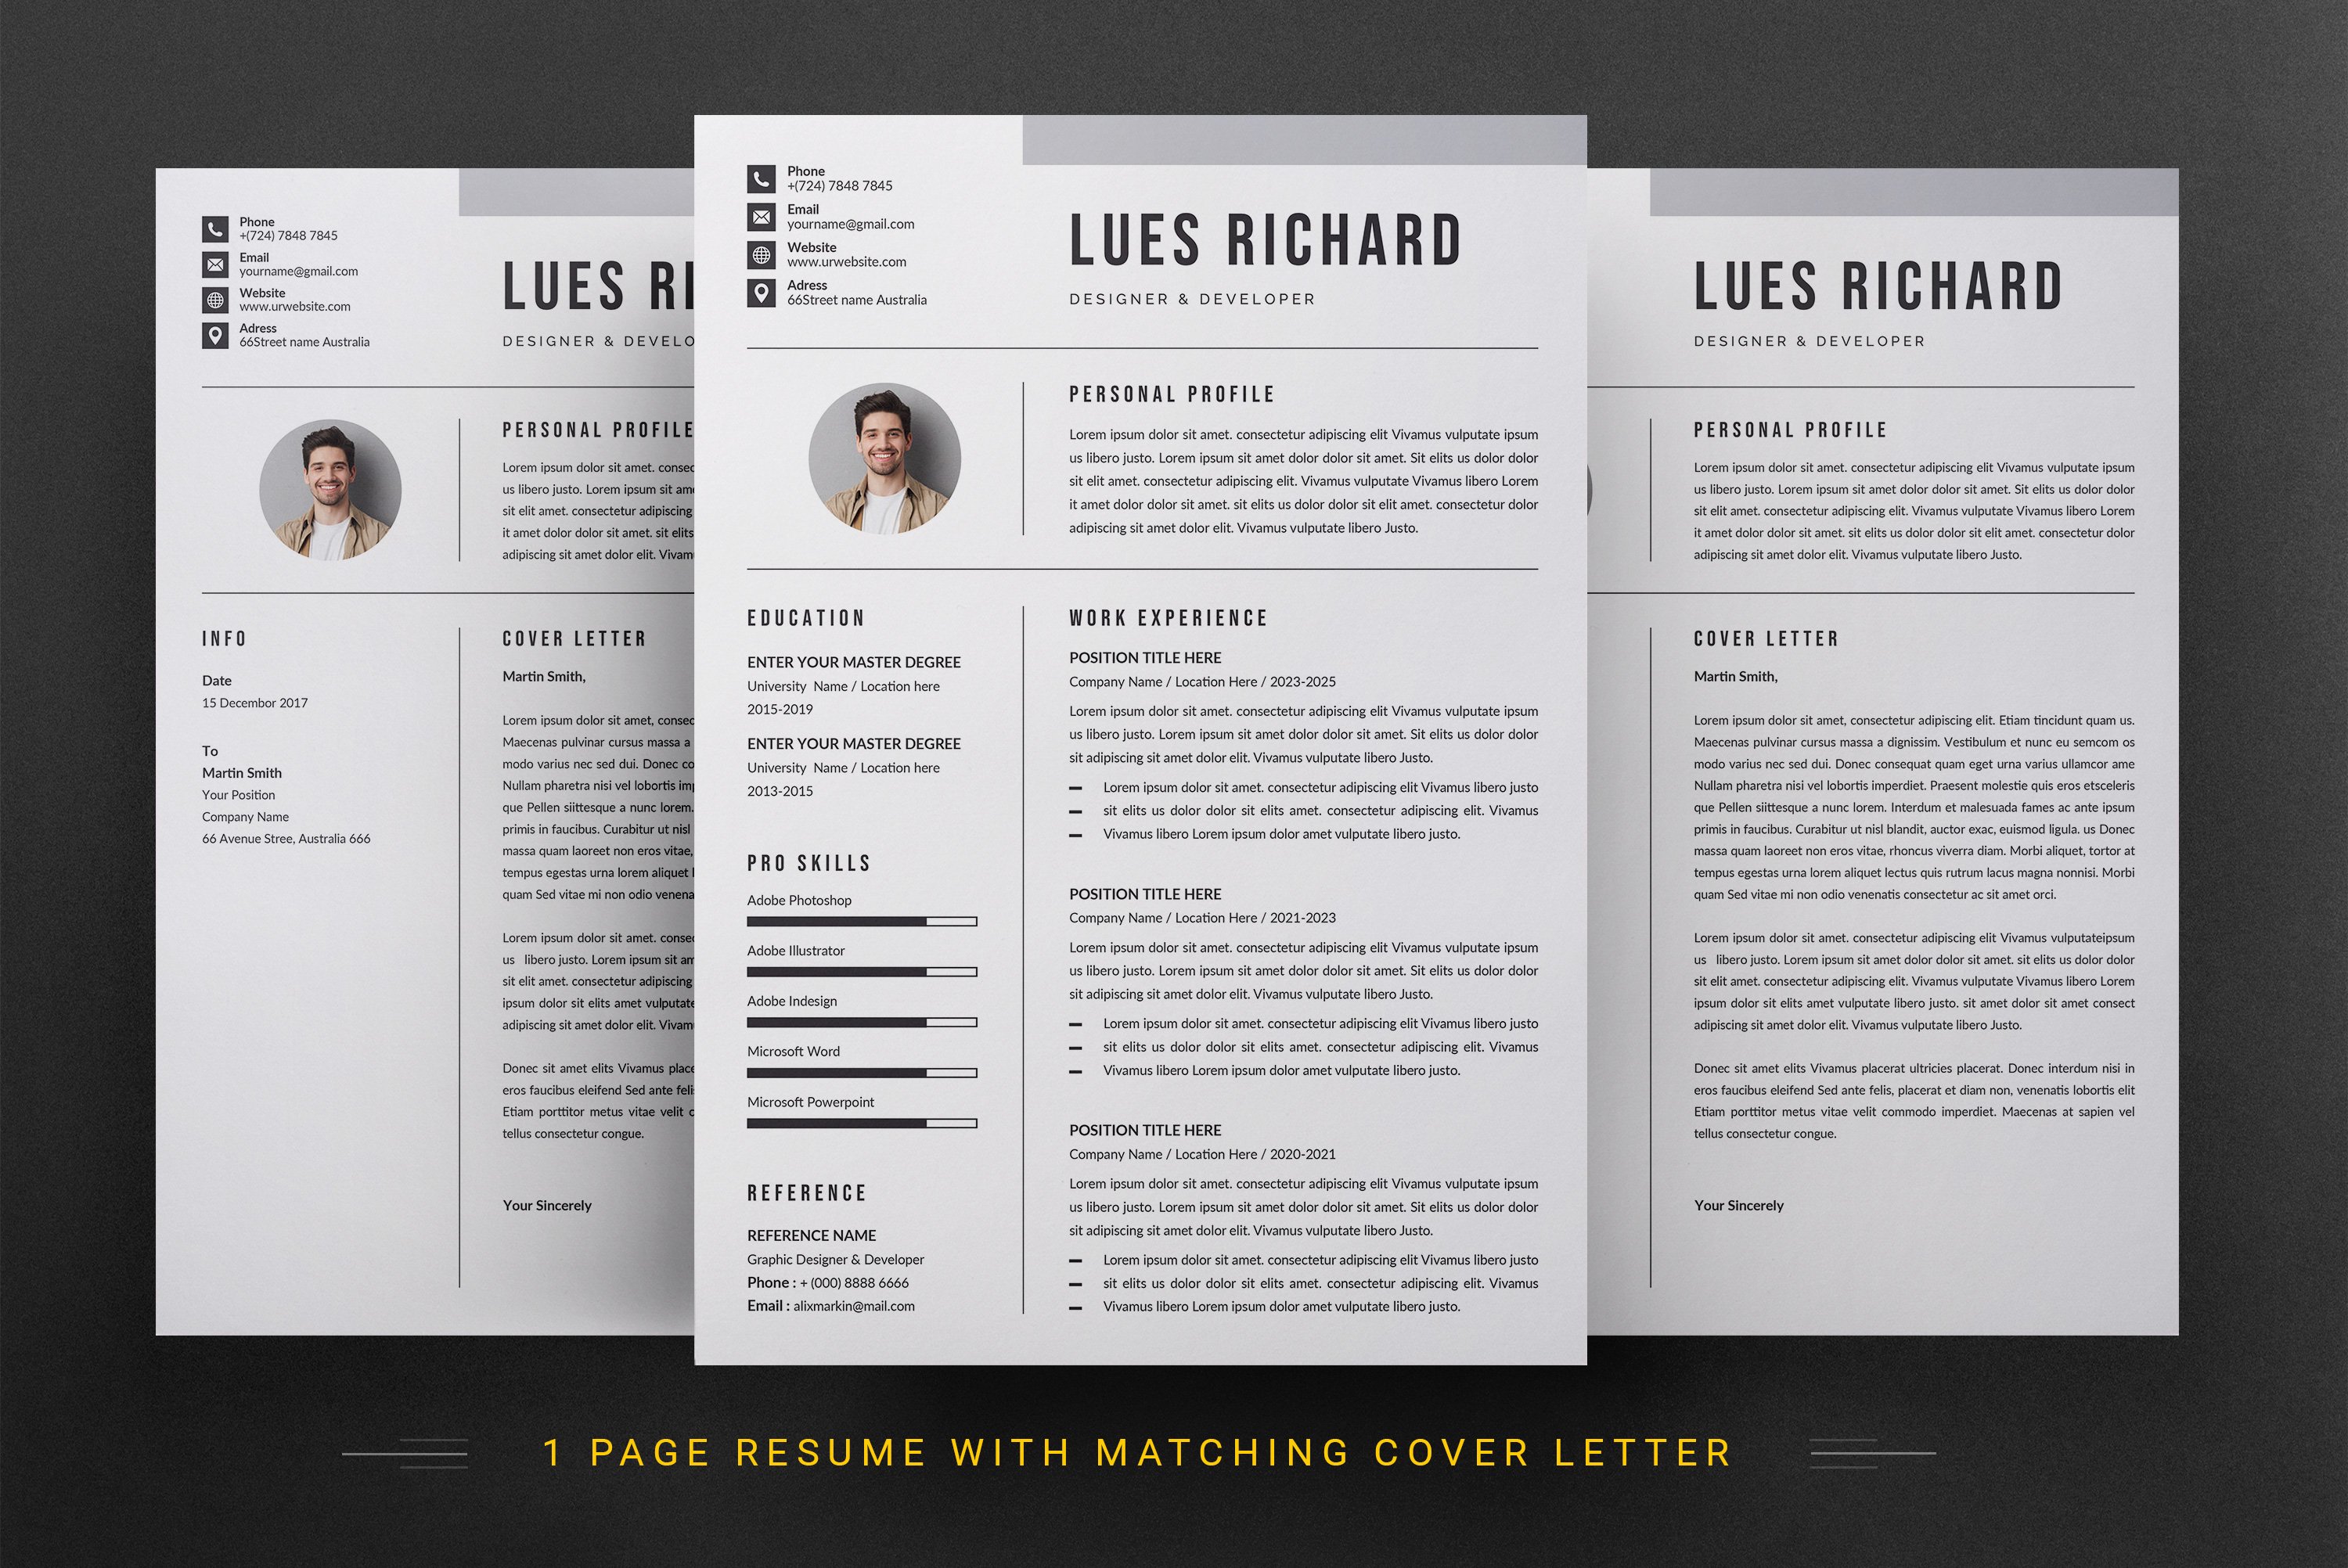 Resume preview image.